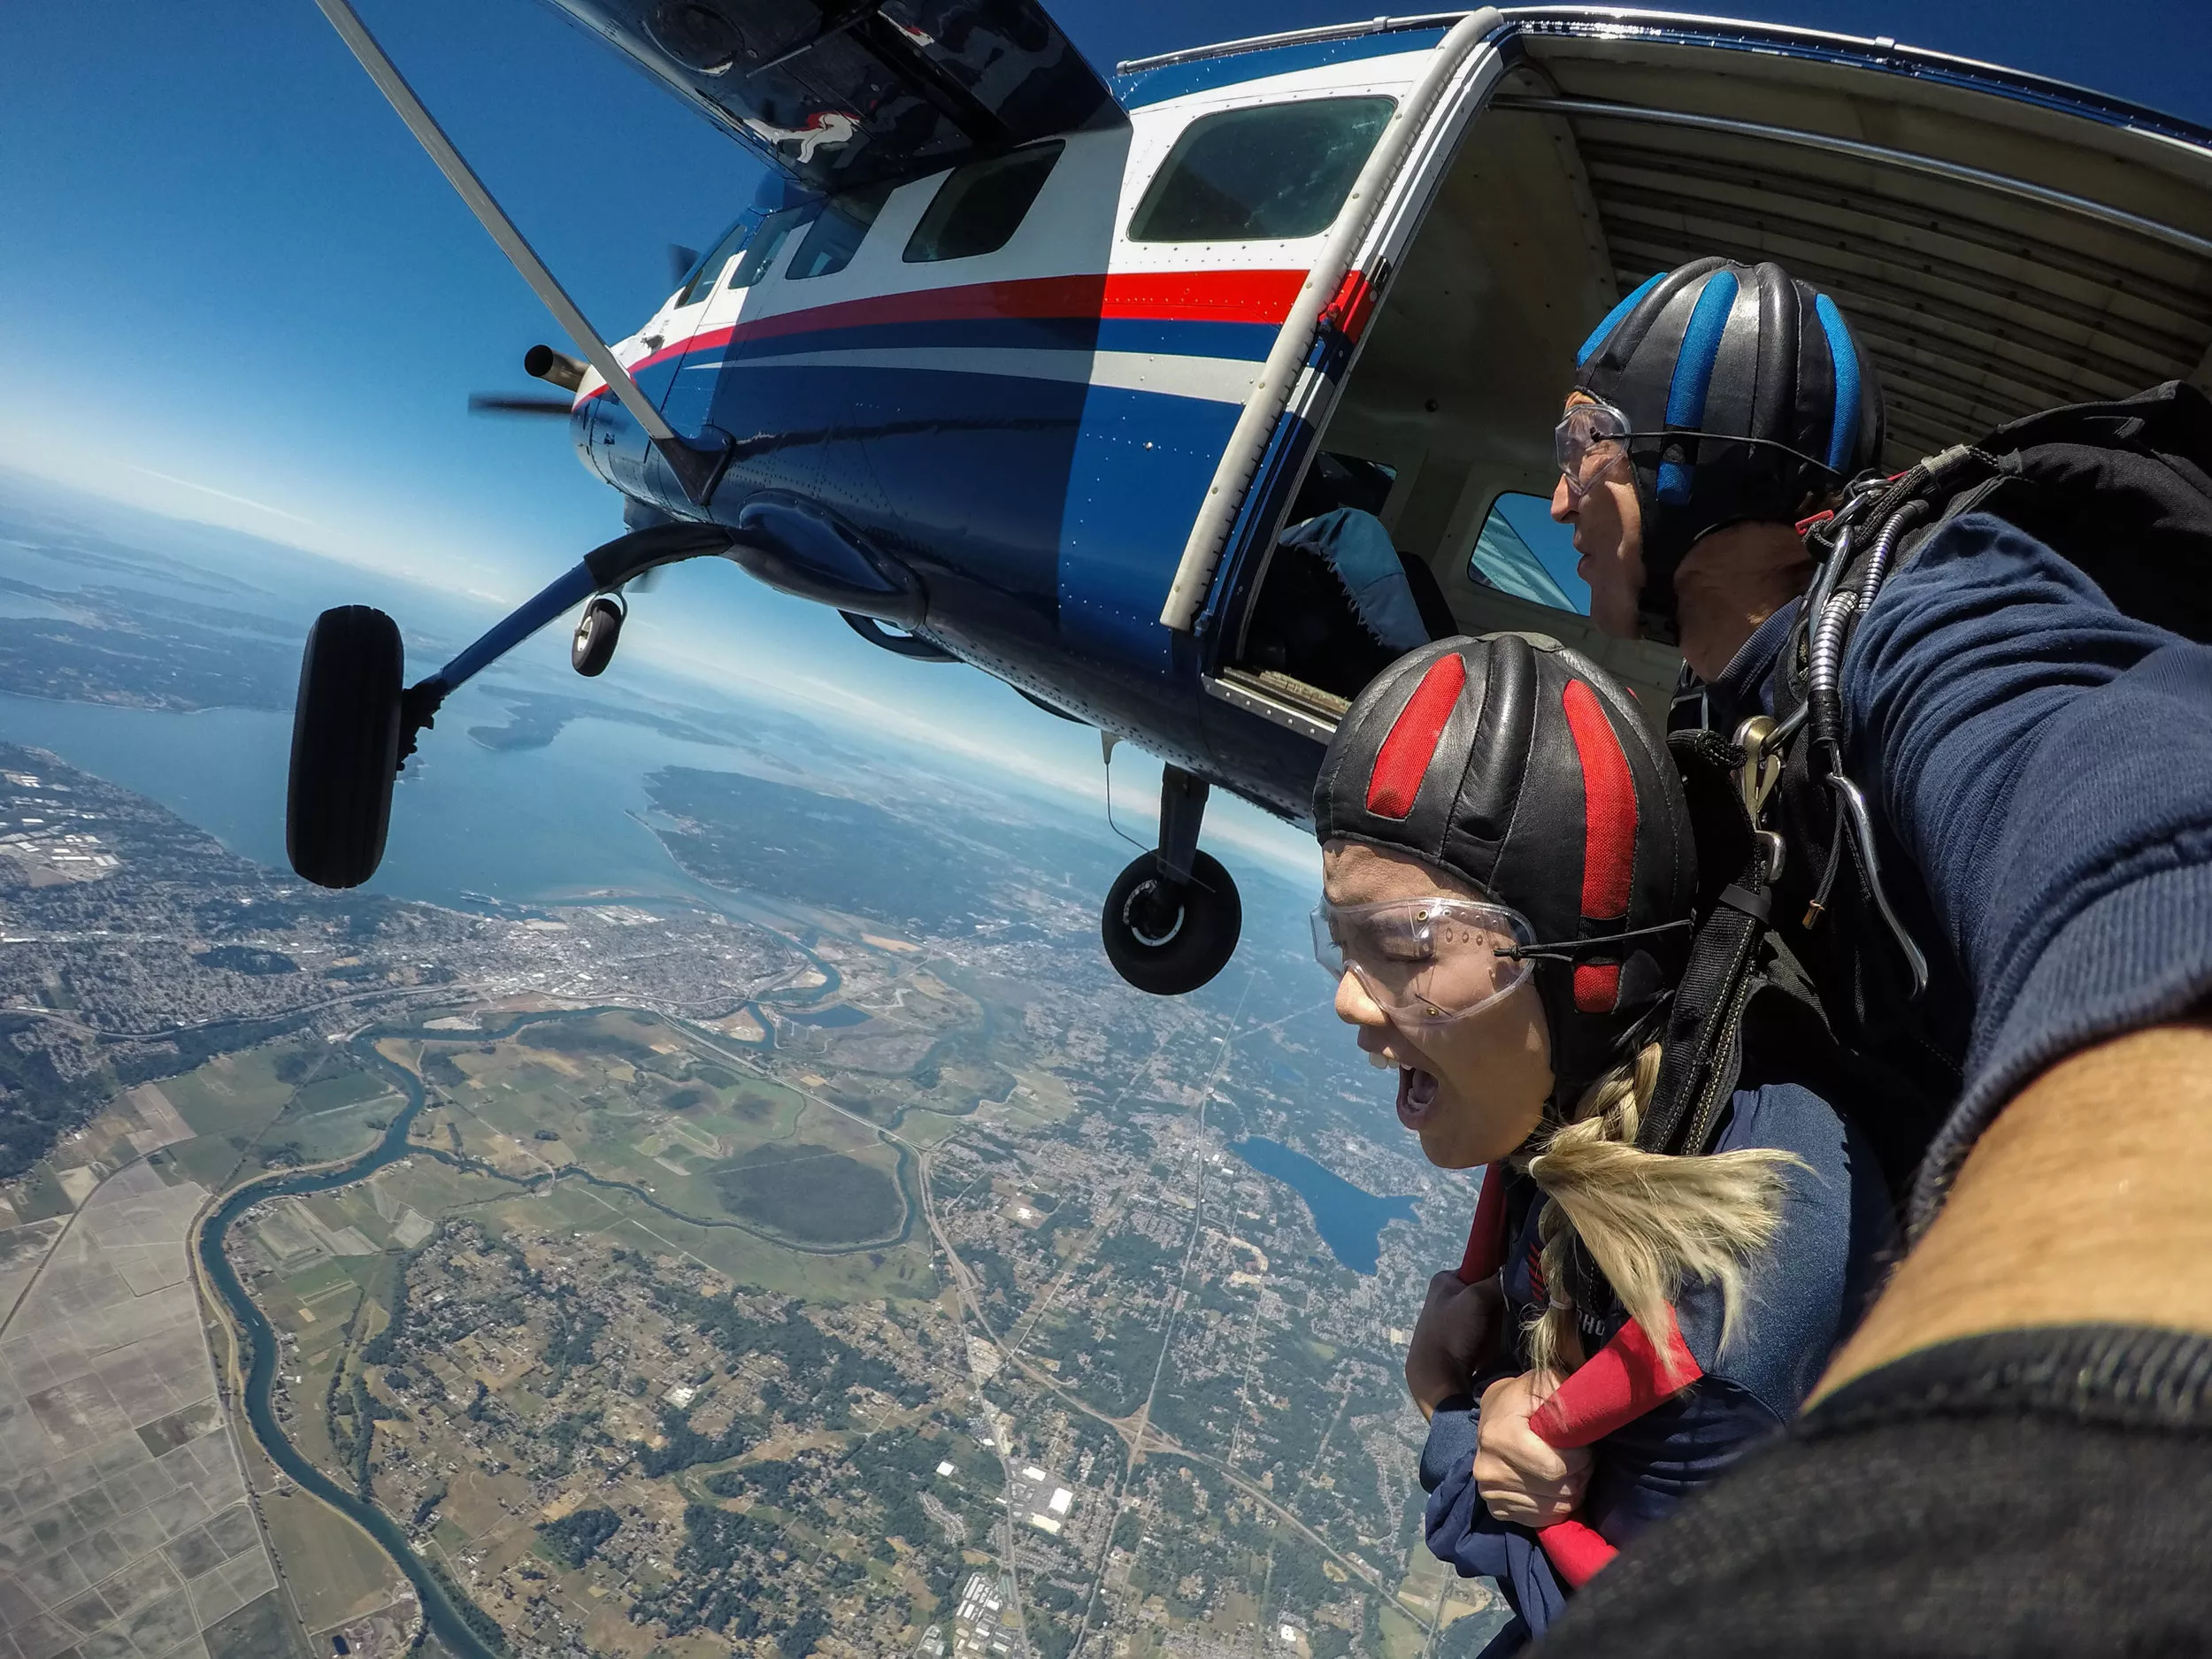 Skydive Snohomish in USA, North America | Skydiving - Rated 5.3